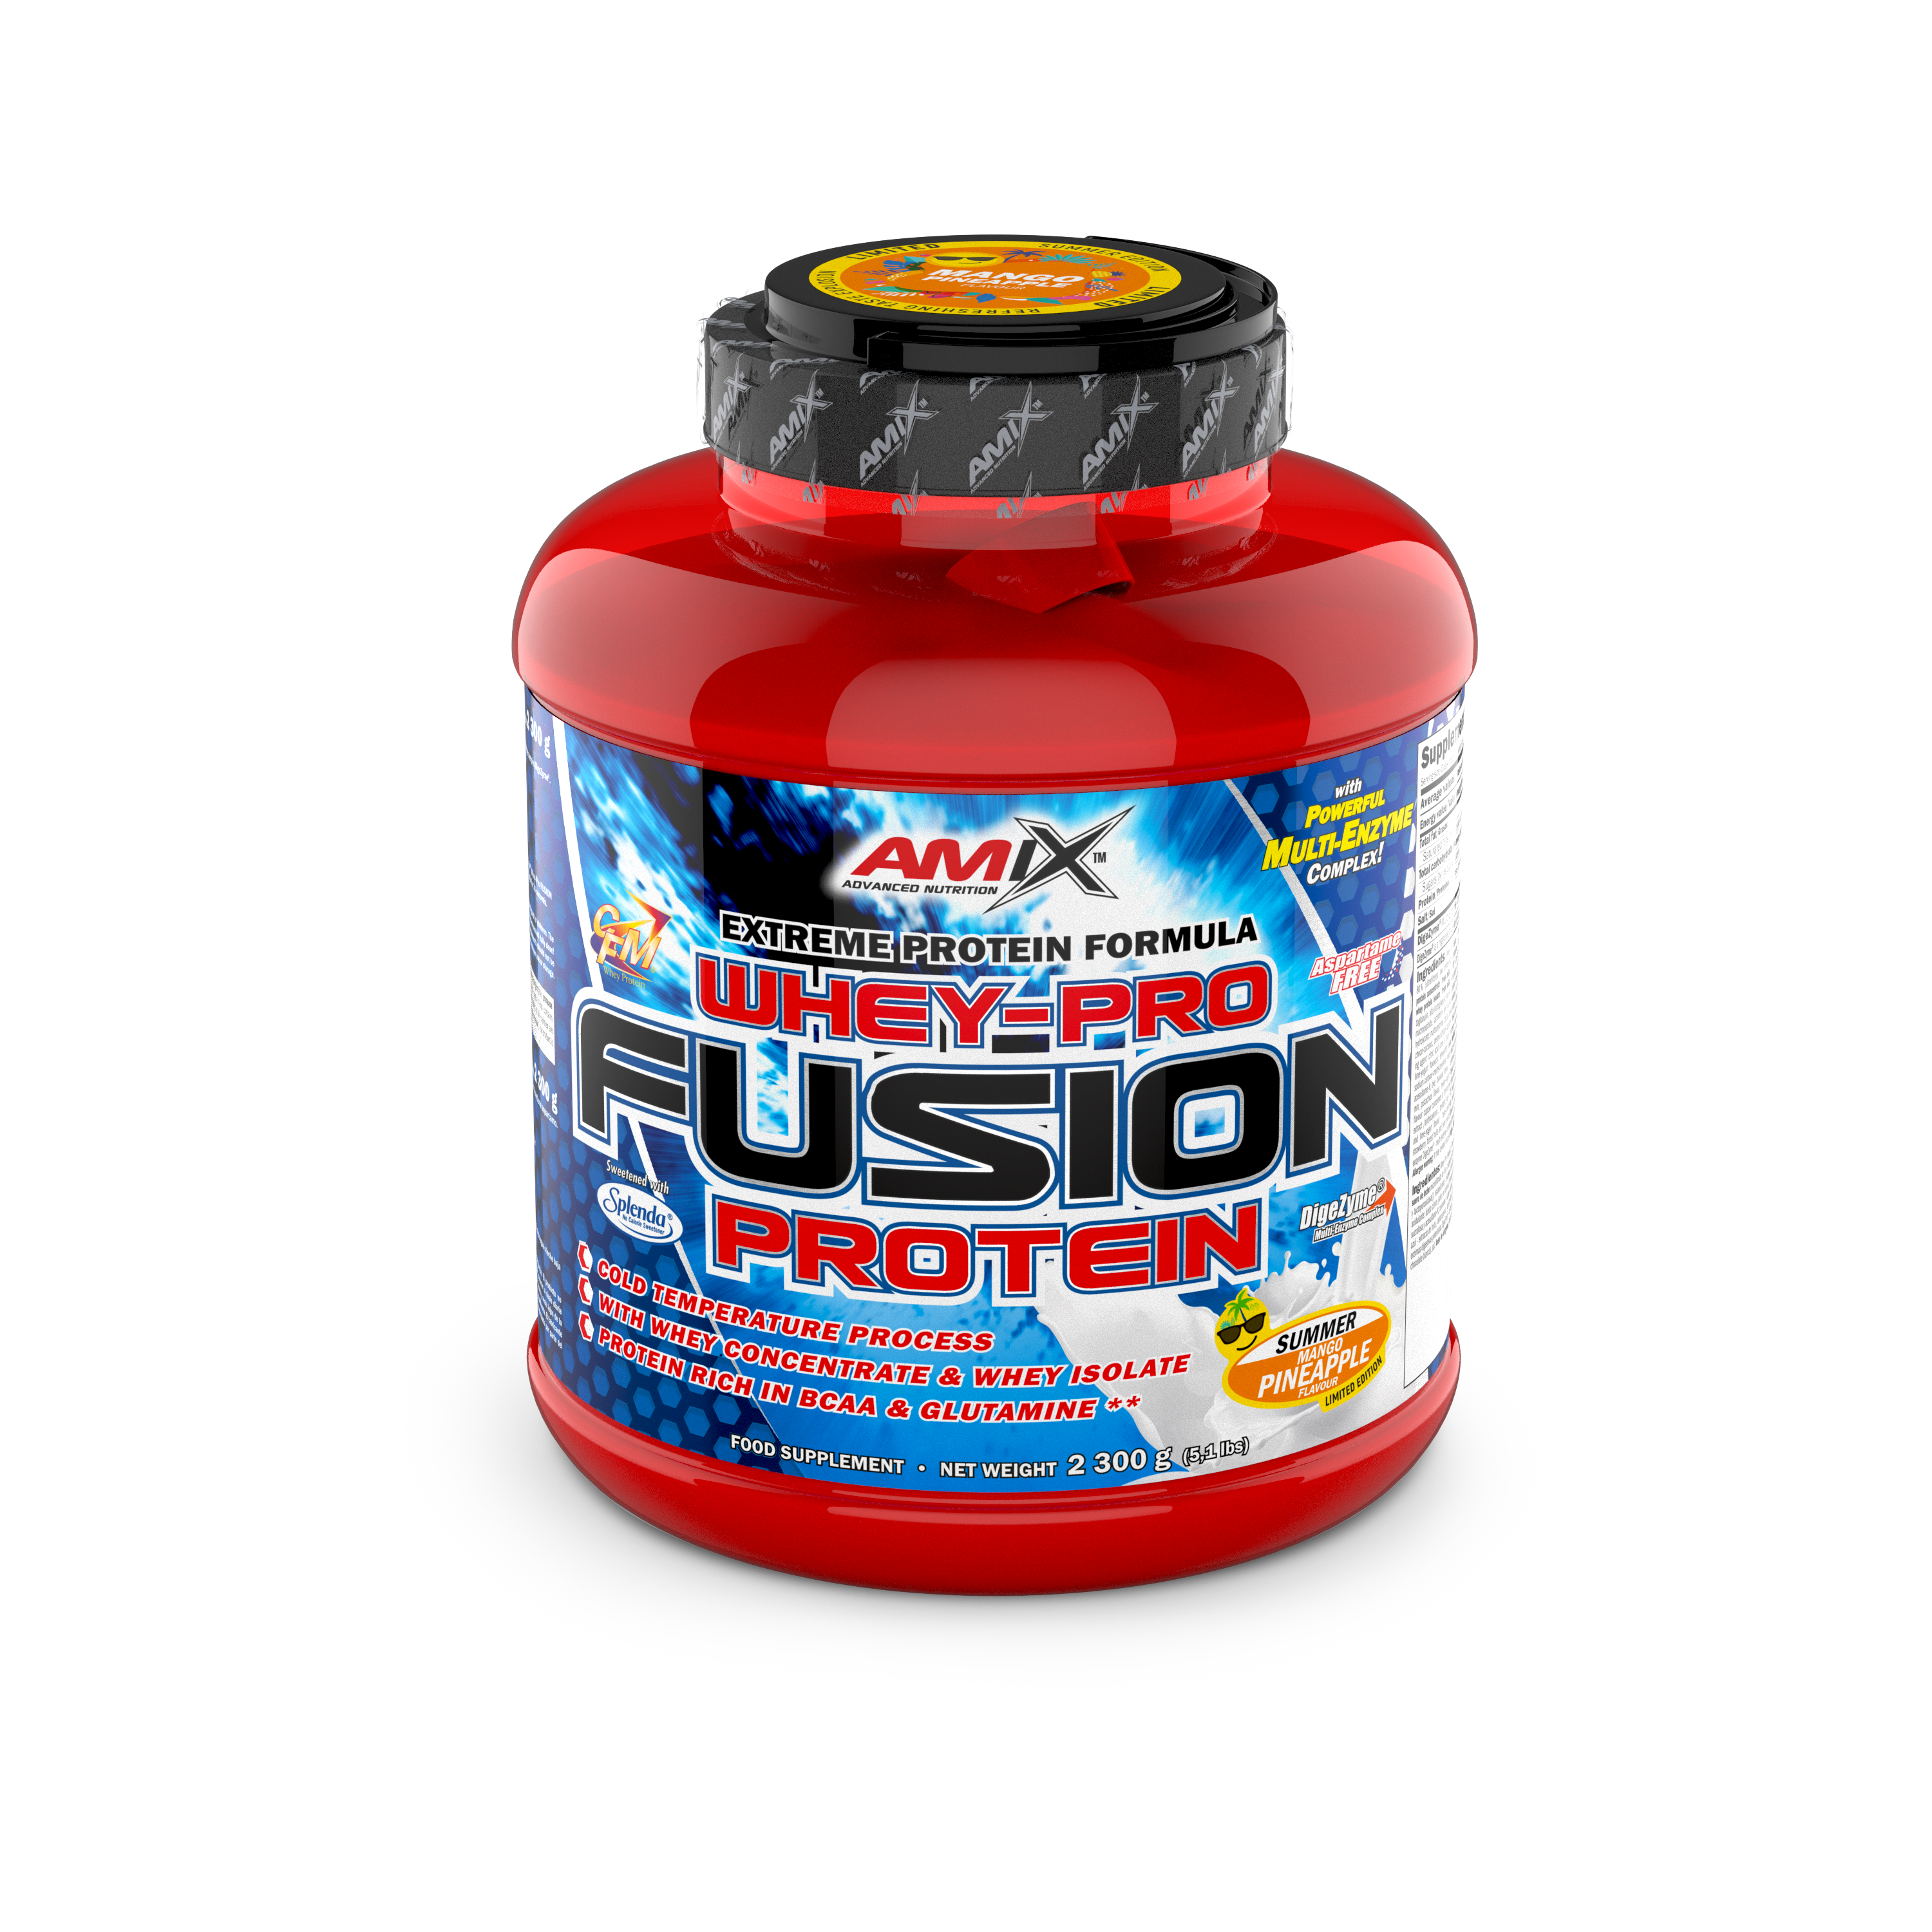 WHEY PRO FUSION PROTEIN 2.3gr